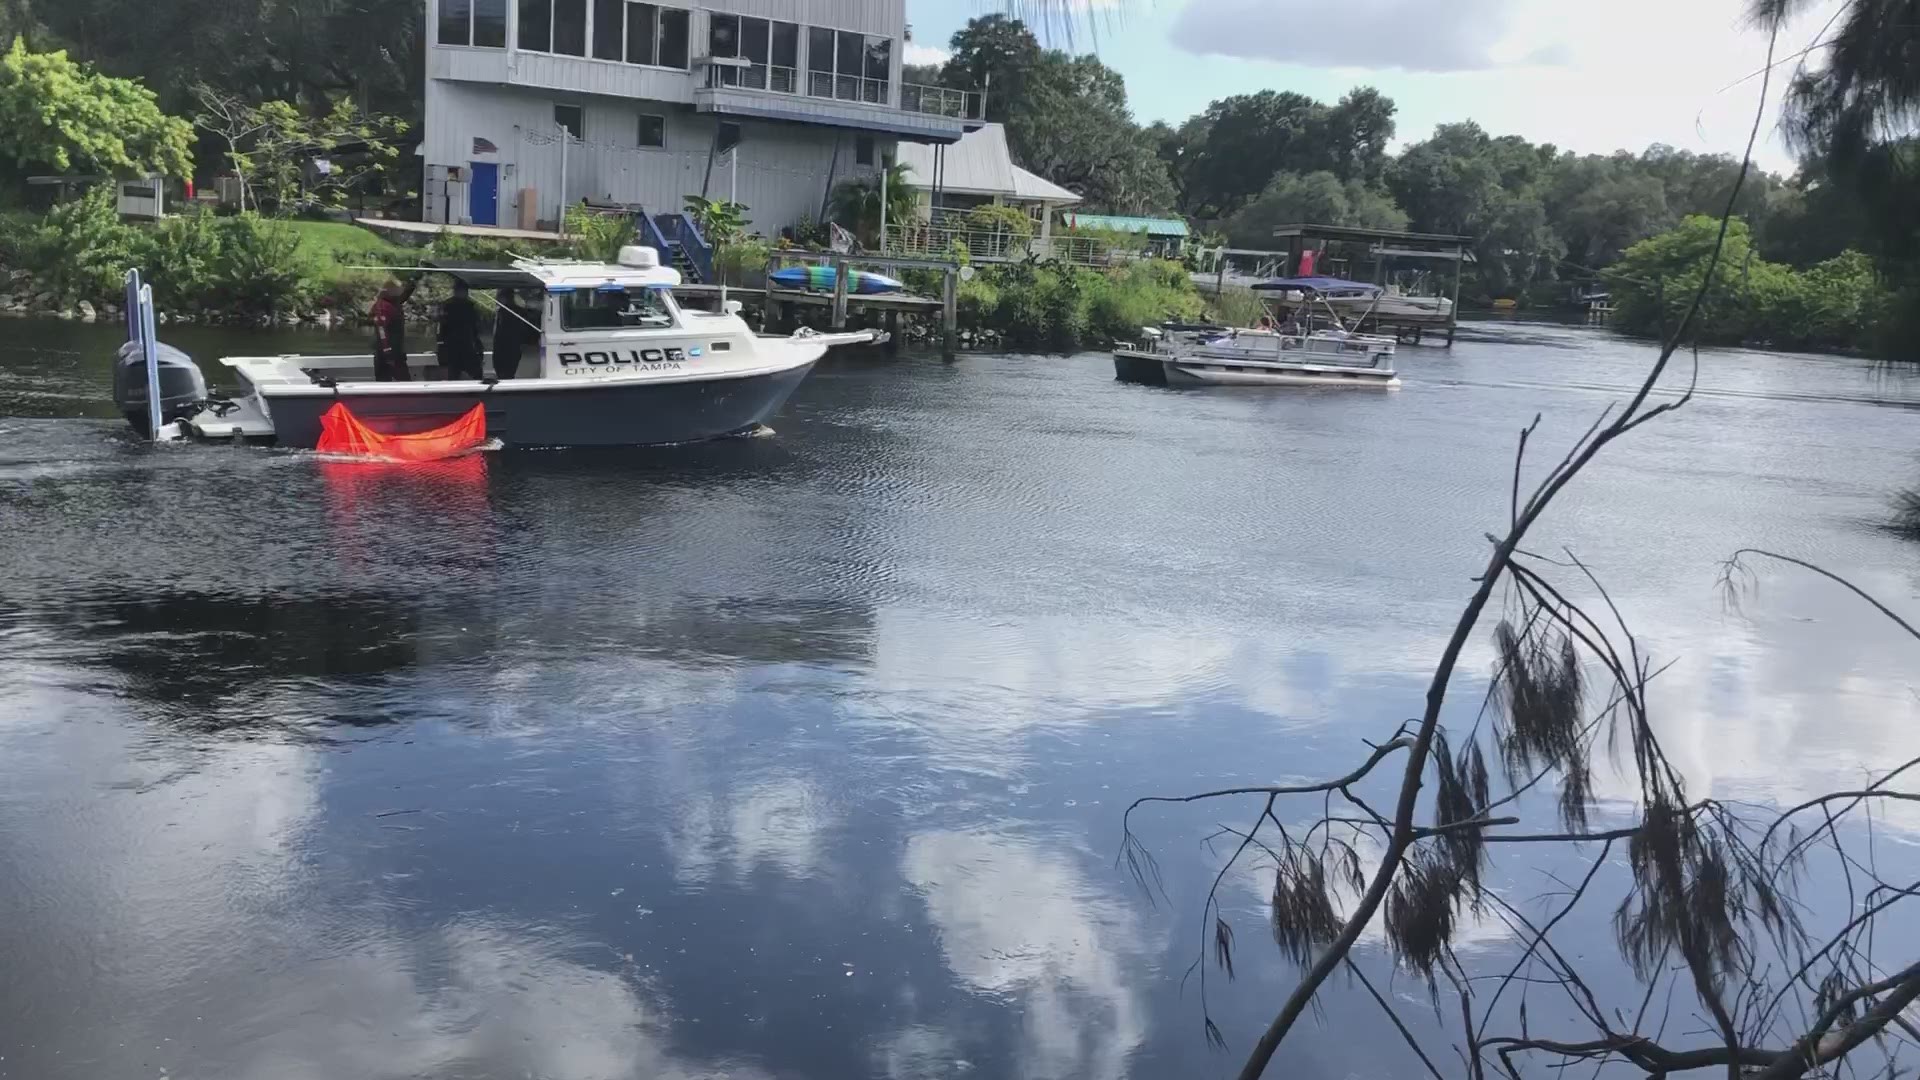 A body was found Tuesday in the Hillsborough River near the marine.